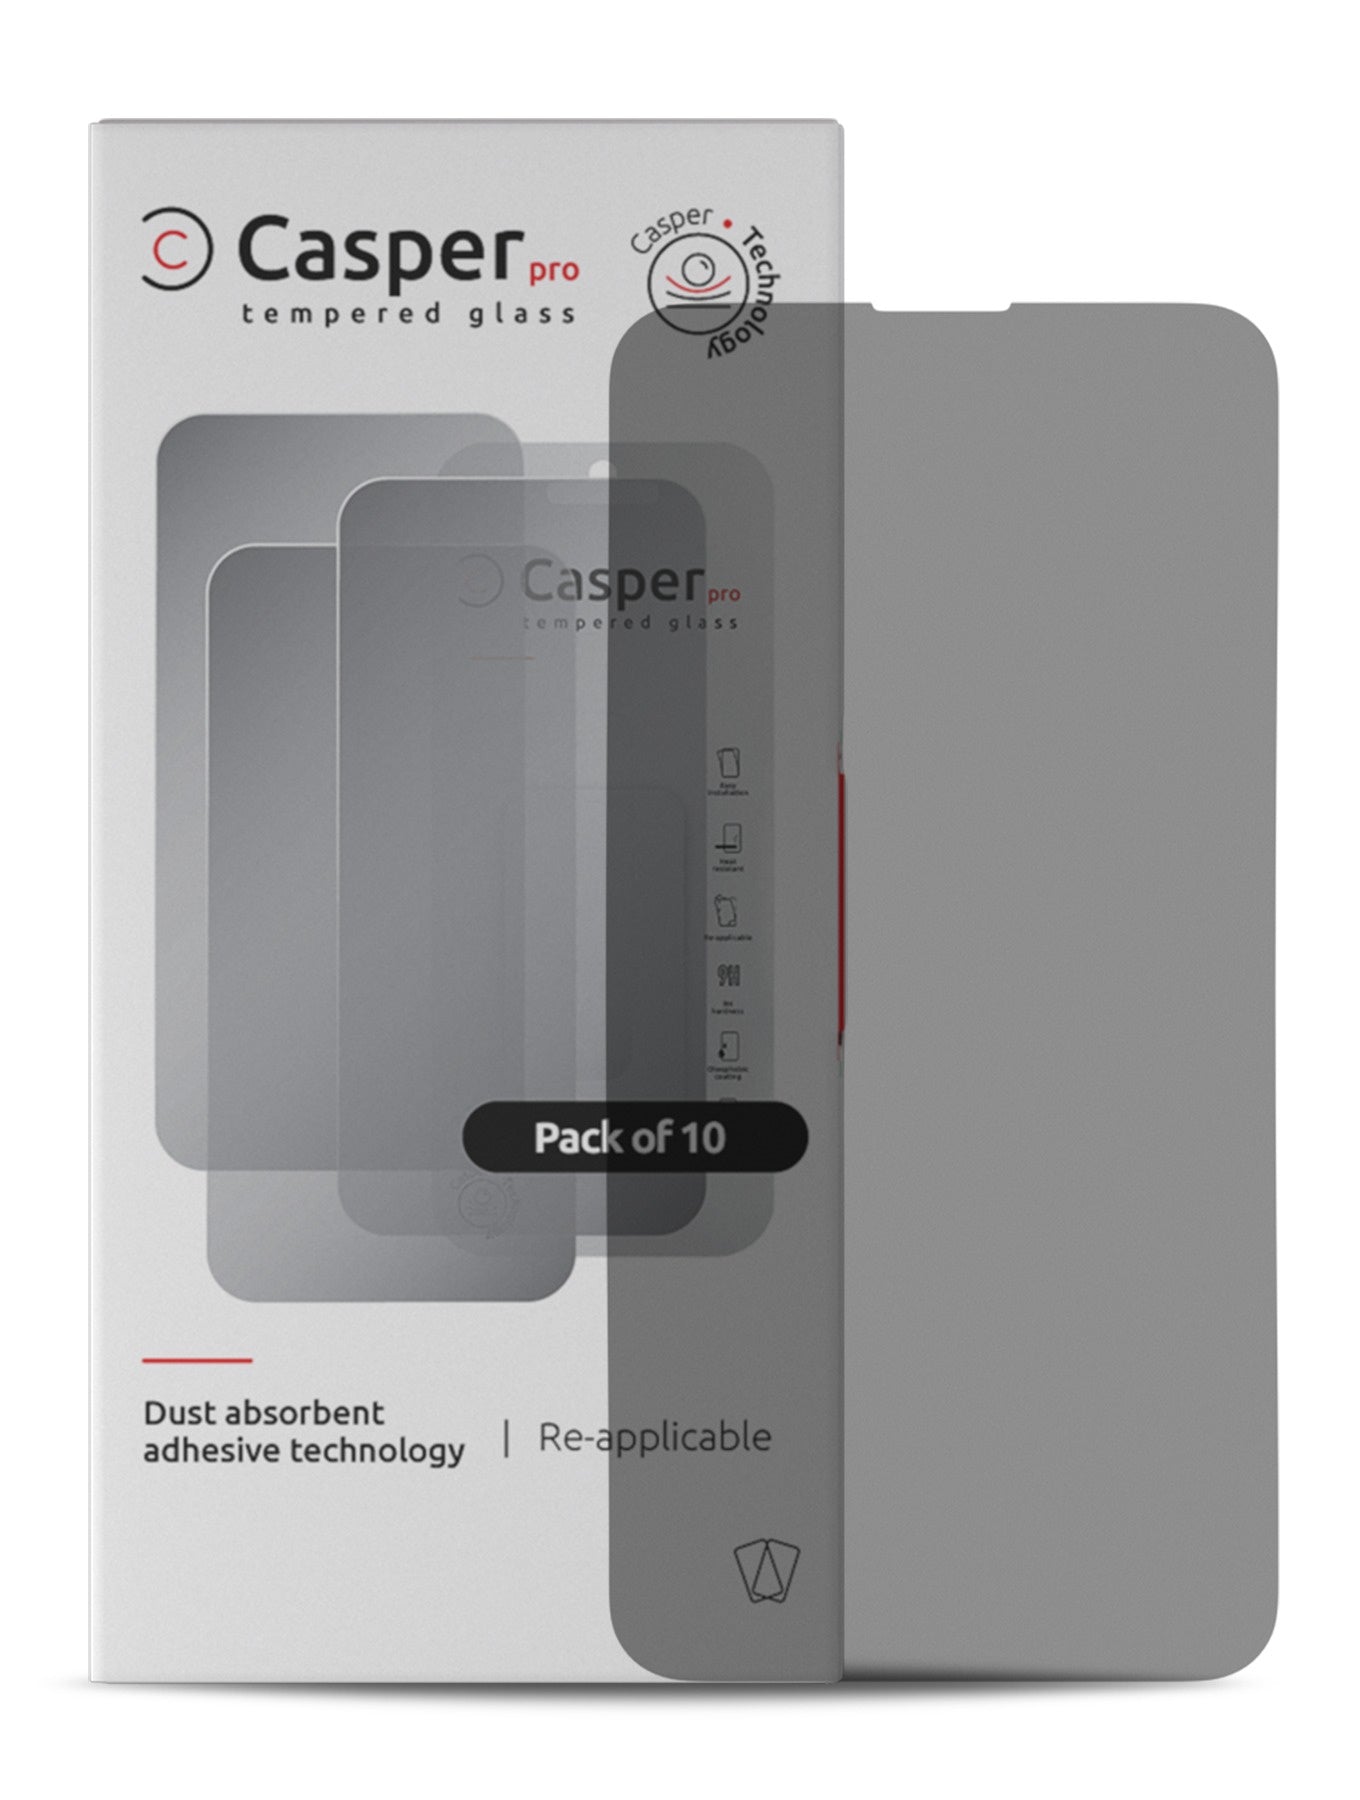 Casper Pro Tempered Glass Compatible For iPhone X / XS / 11 Pro (10 Pack) (Privacy)